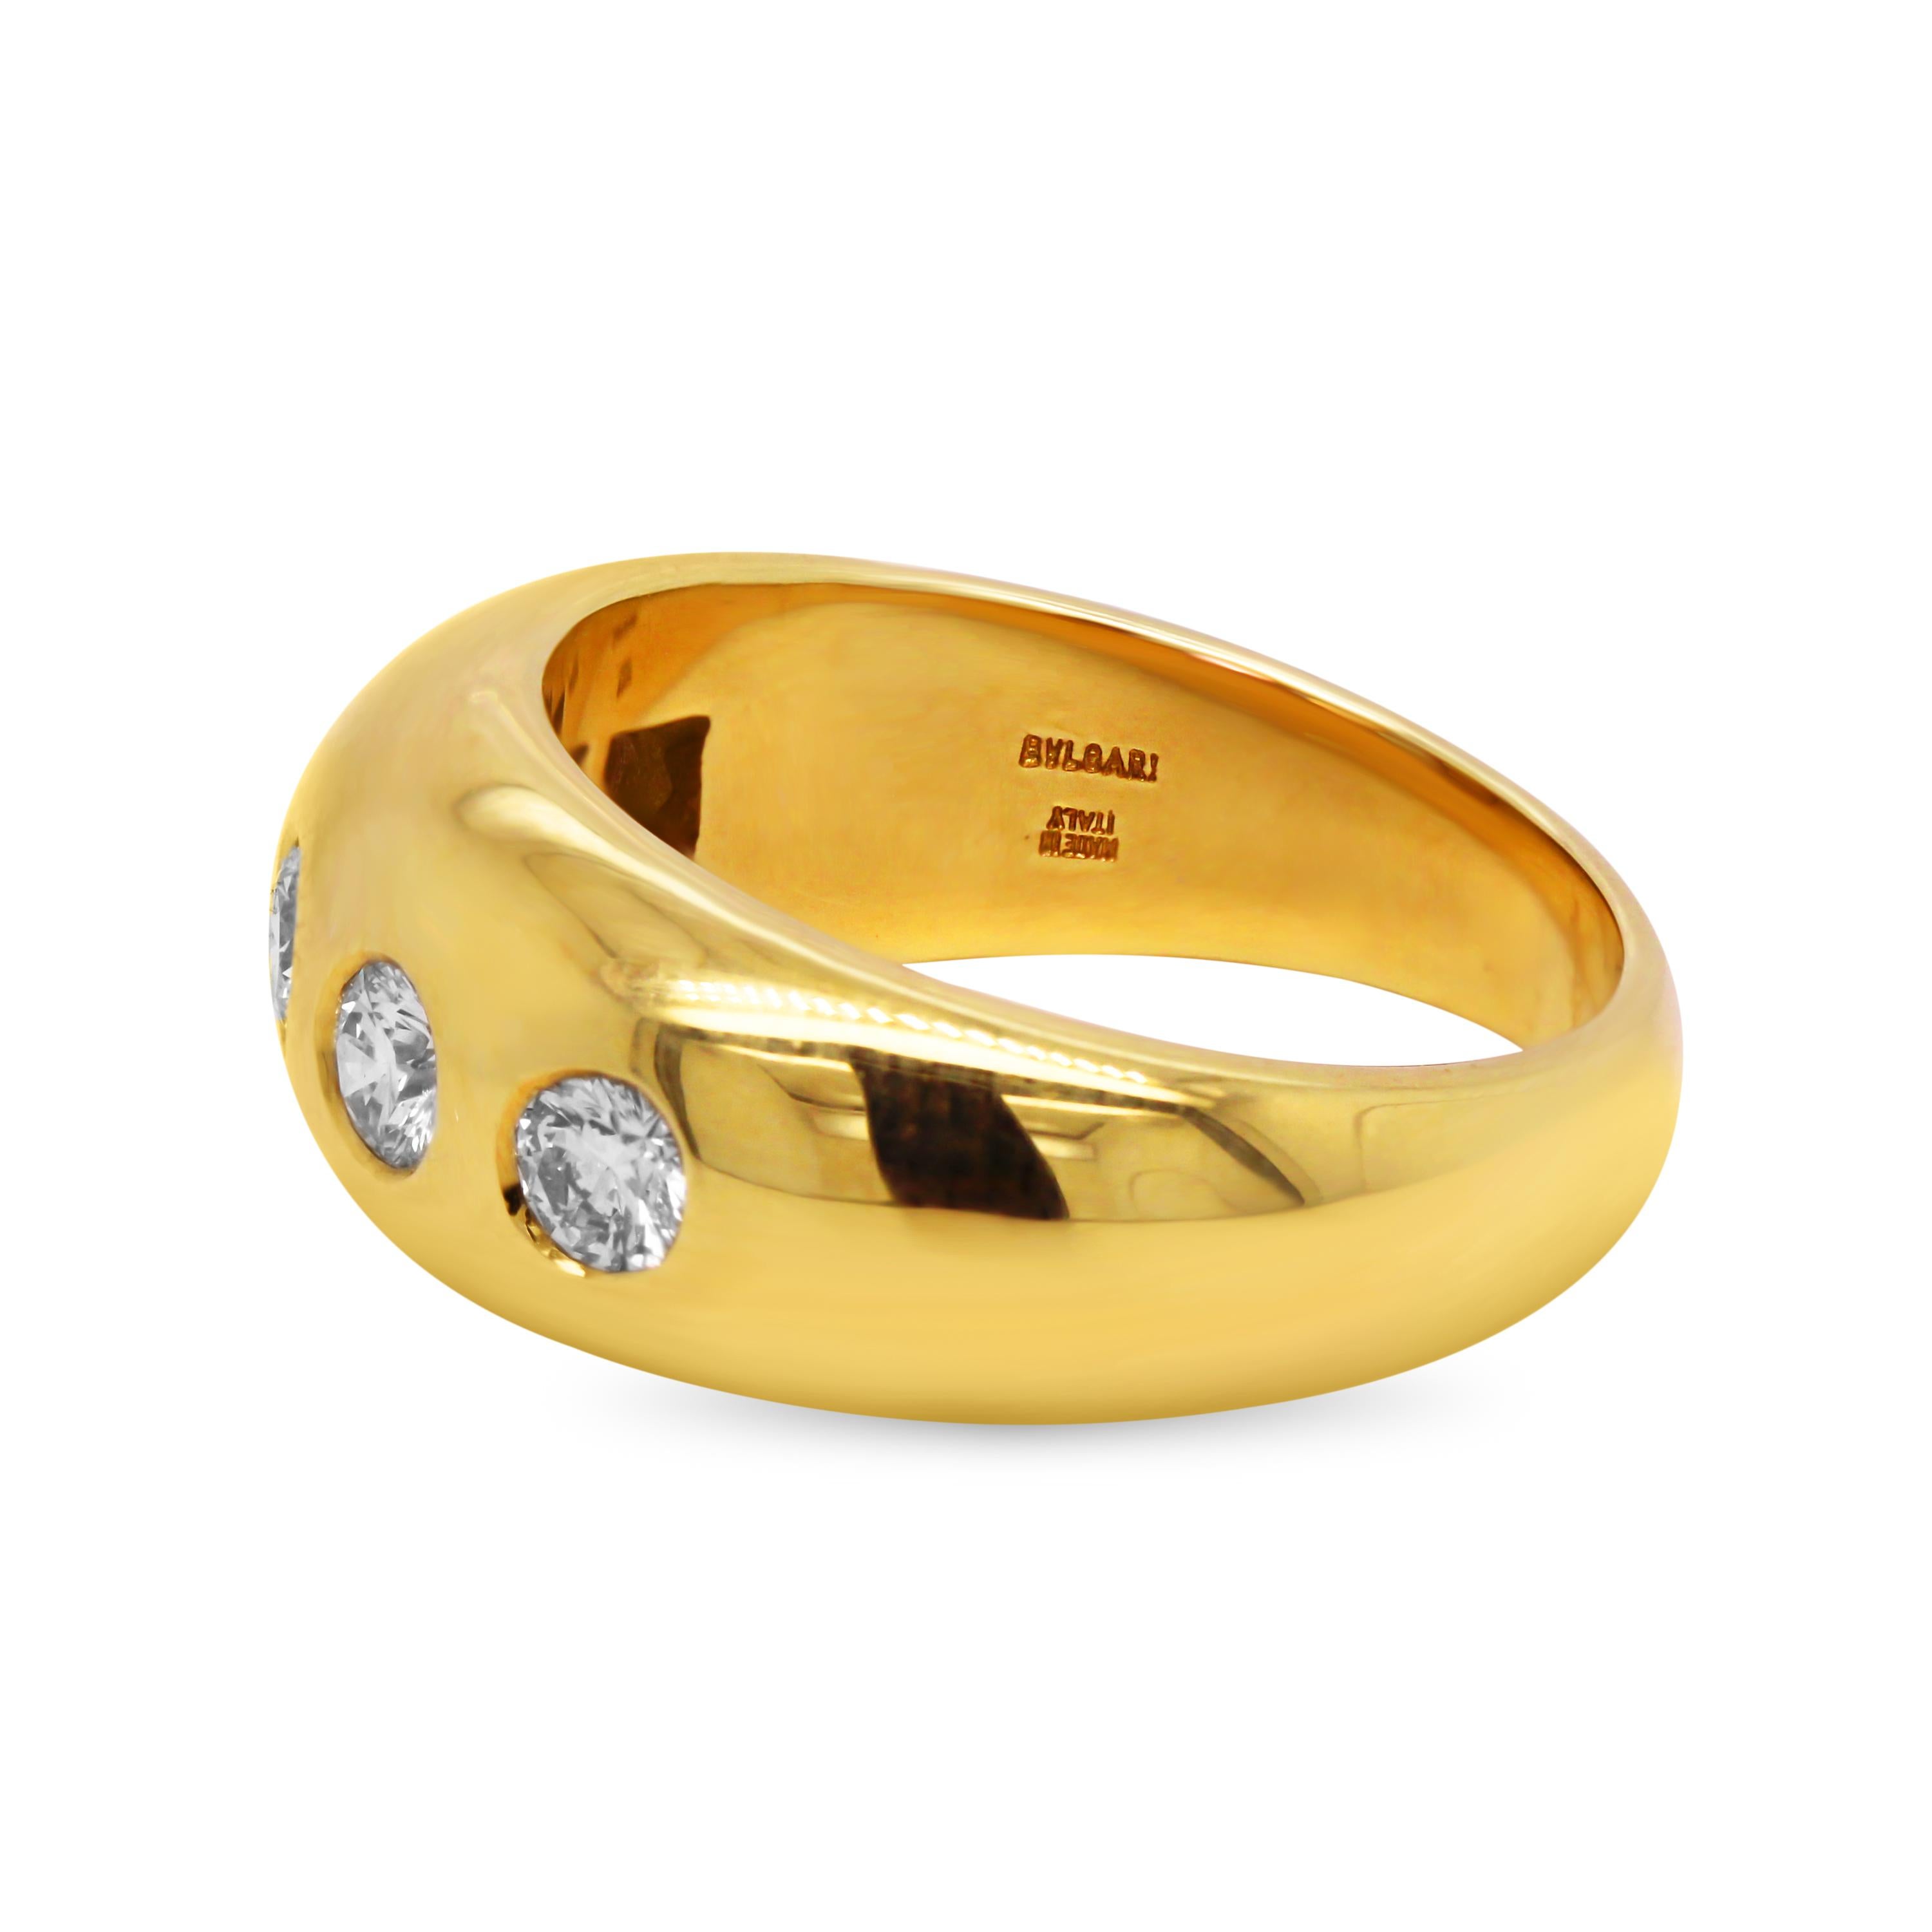 Bvlgari 18 Karat Yellow Gold Five Diamond Ring

Simple, yet elegant, this five diamond ring by Bvlgari features a high-polished, shiny finishing to the gold with the diamonds bezel set along the center.

Apprx. 0.90 carat, G-F color, VS clarity